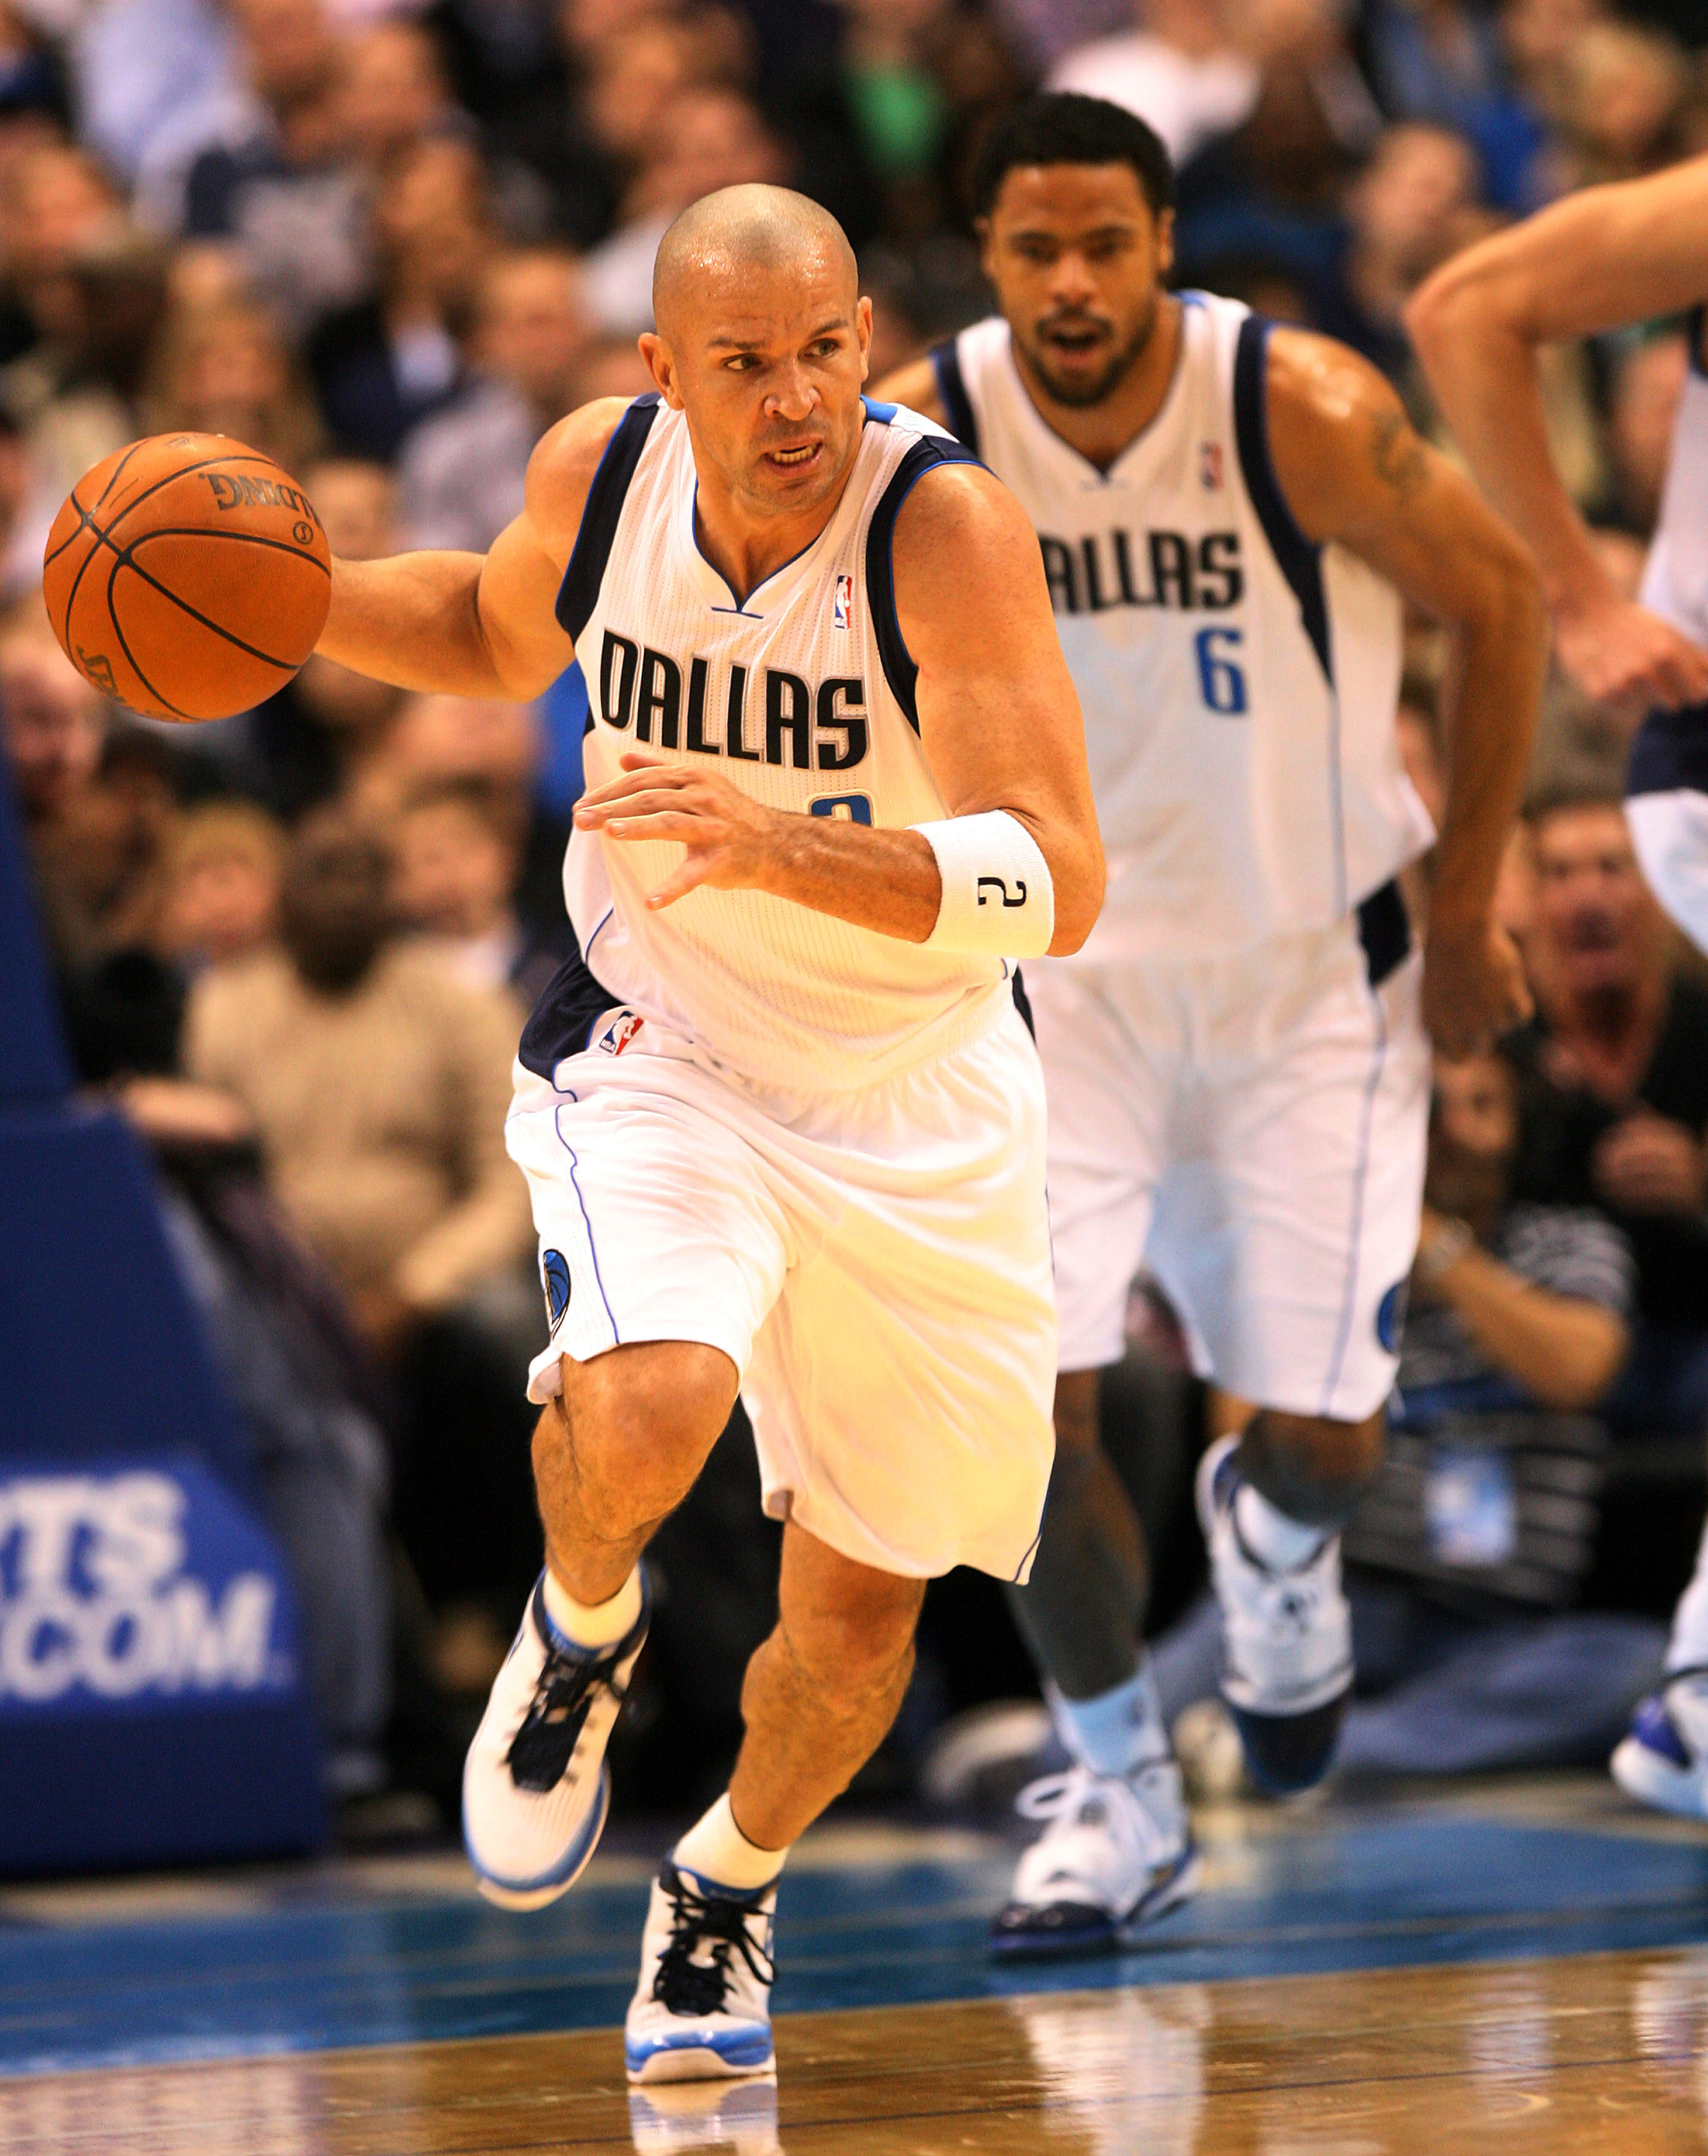 DALLAS - NOVEMBER 27: Jason Kidd #2 of the Dallas Mavericks drives the ball against the Miami Heat  on November 27, 2010 at the American Airlines Center in Dallas, Texas. NOTE TO USER: User expressly acknowledges and agrees that, by downloading and or usi